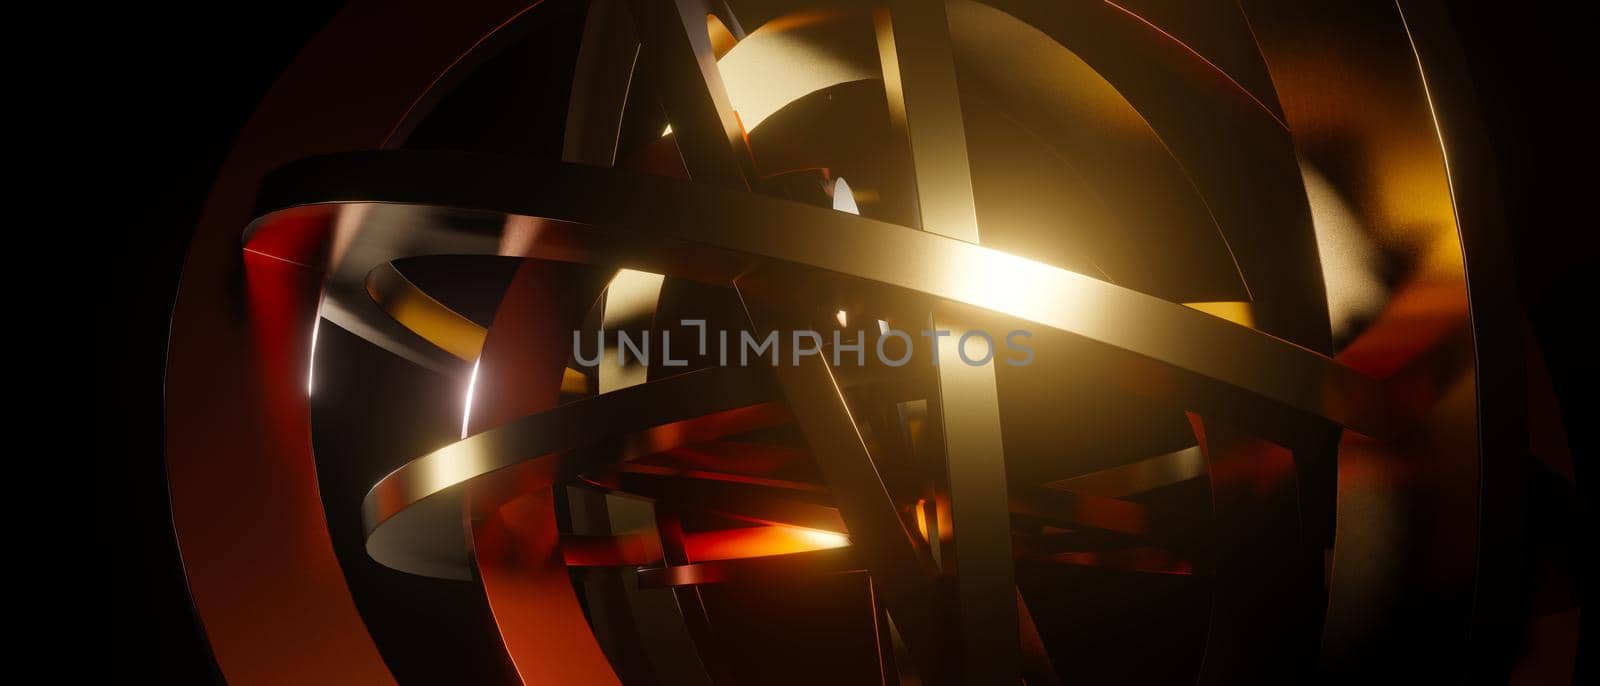 Abstract Modern Shiny Metallic Gold Copper Background Wallpaper 3D Render by yay_lmrb